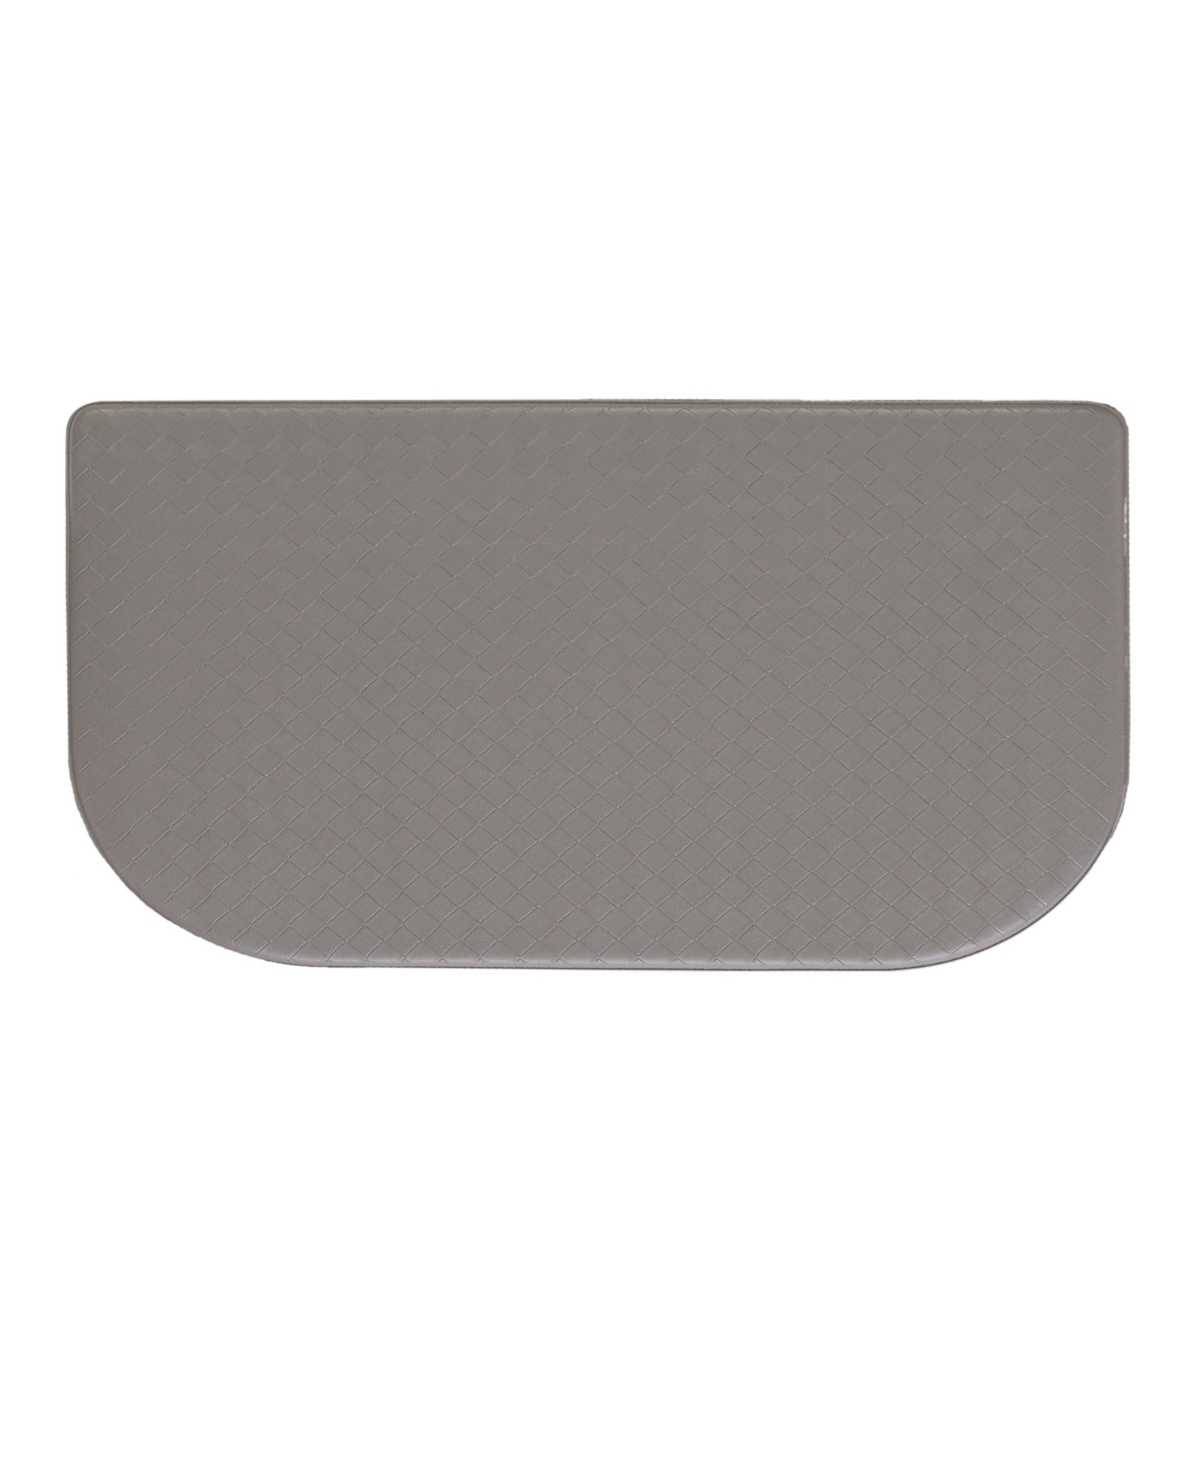 Chef Gear Playa Wedge Fatigue-resistant Kitchen Mat, 17.5" X 48" In Gray